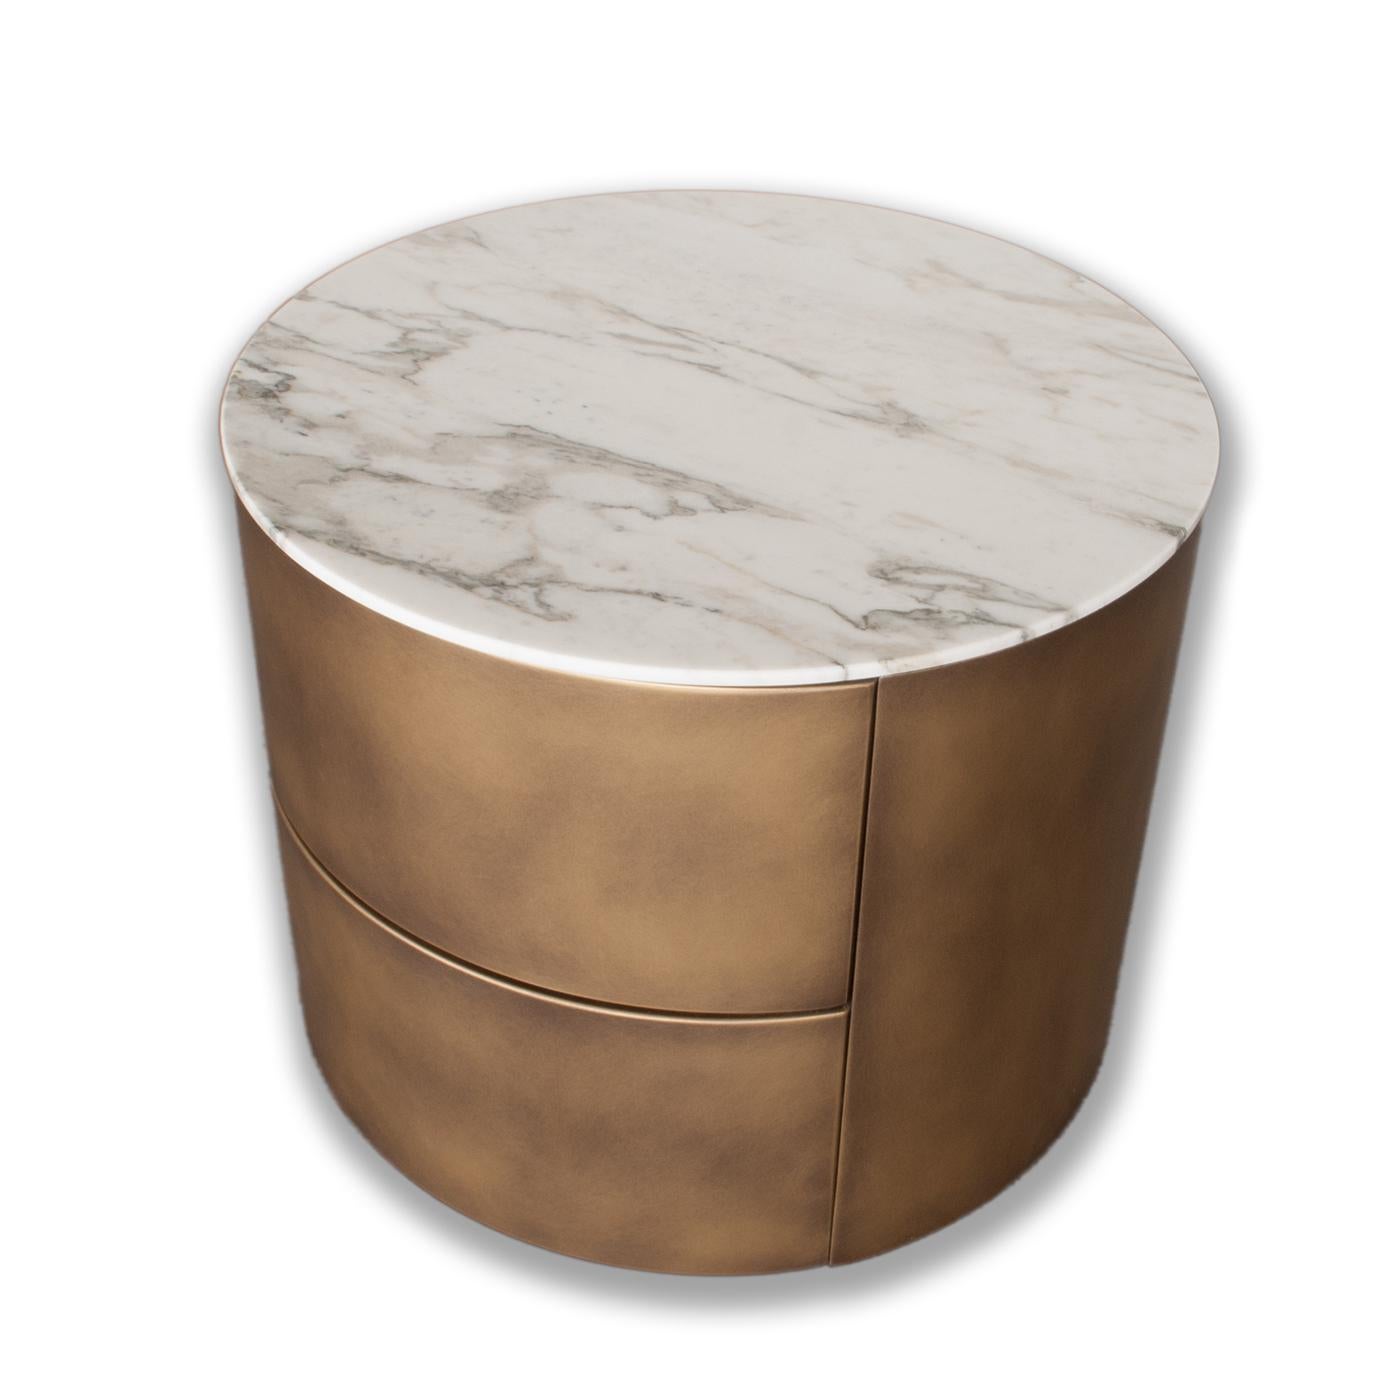 Complementing a contemporary bedroom decor with refined sophistication, this stunning bedside table is distinguished by a first-rate marble top showcasing fascinating veining. Boasting two push-pull drawers internally upholstered with fabric and